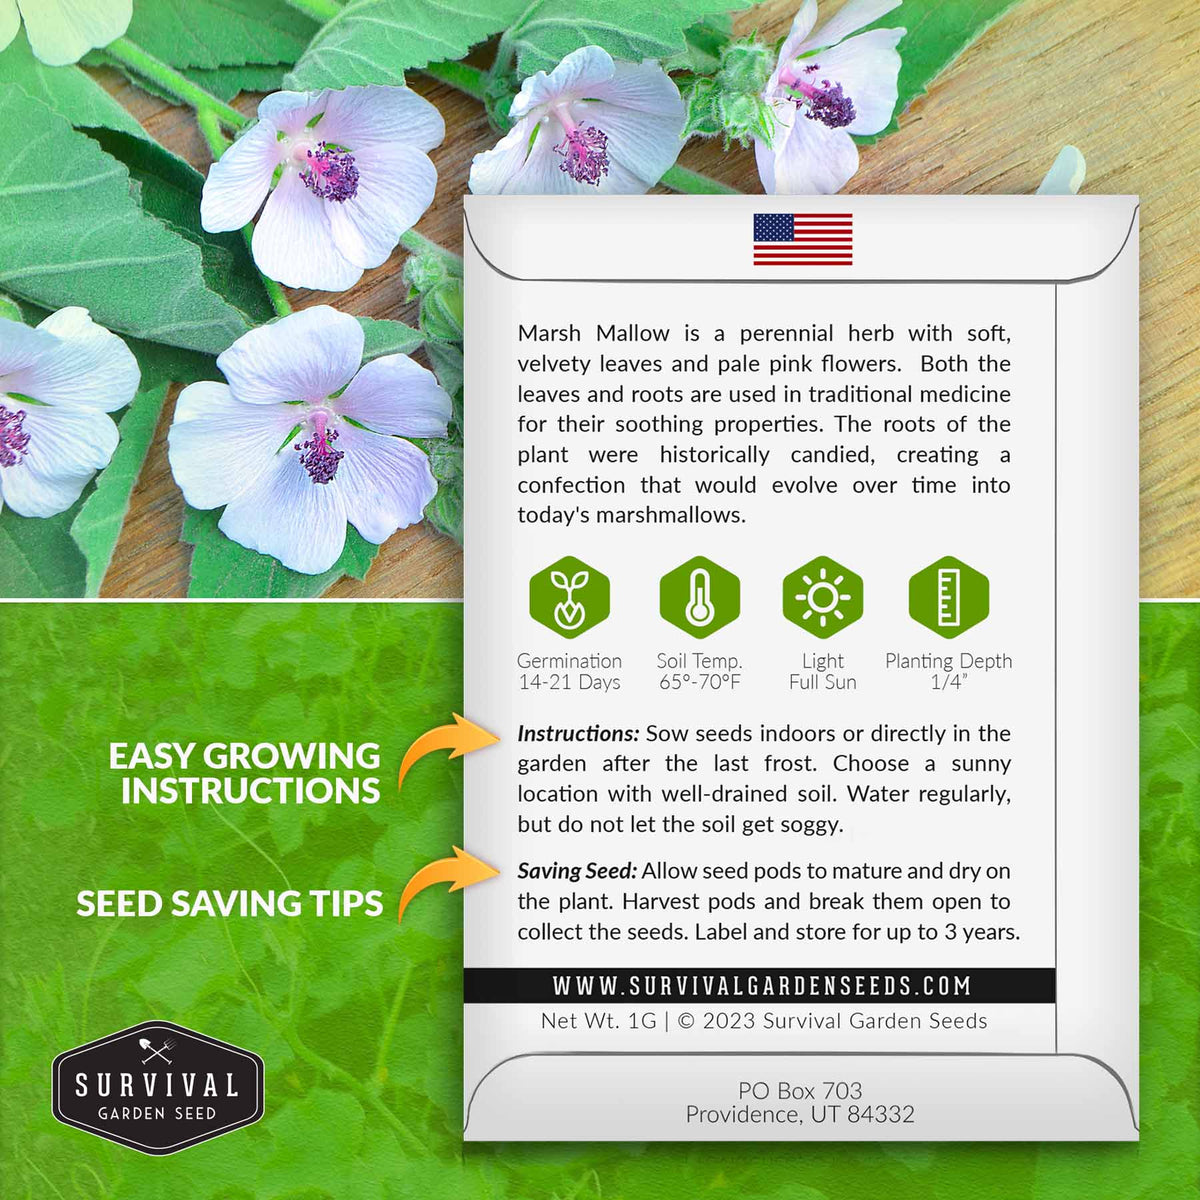 Marsh Mallow seed growing instructions